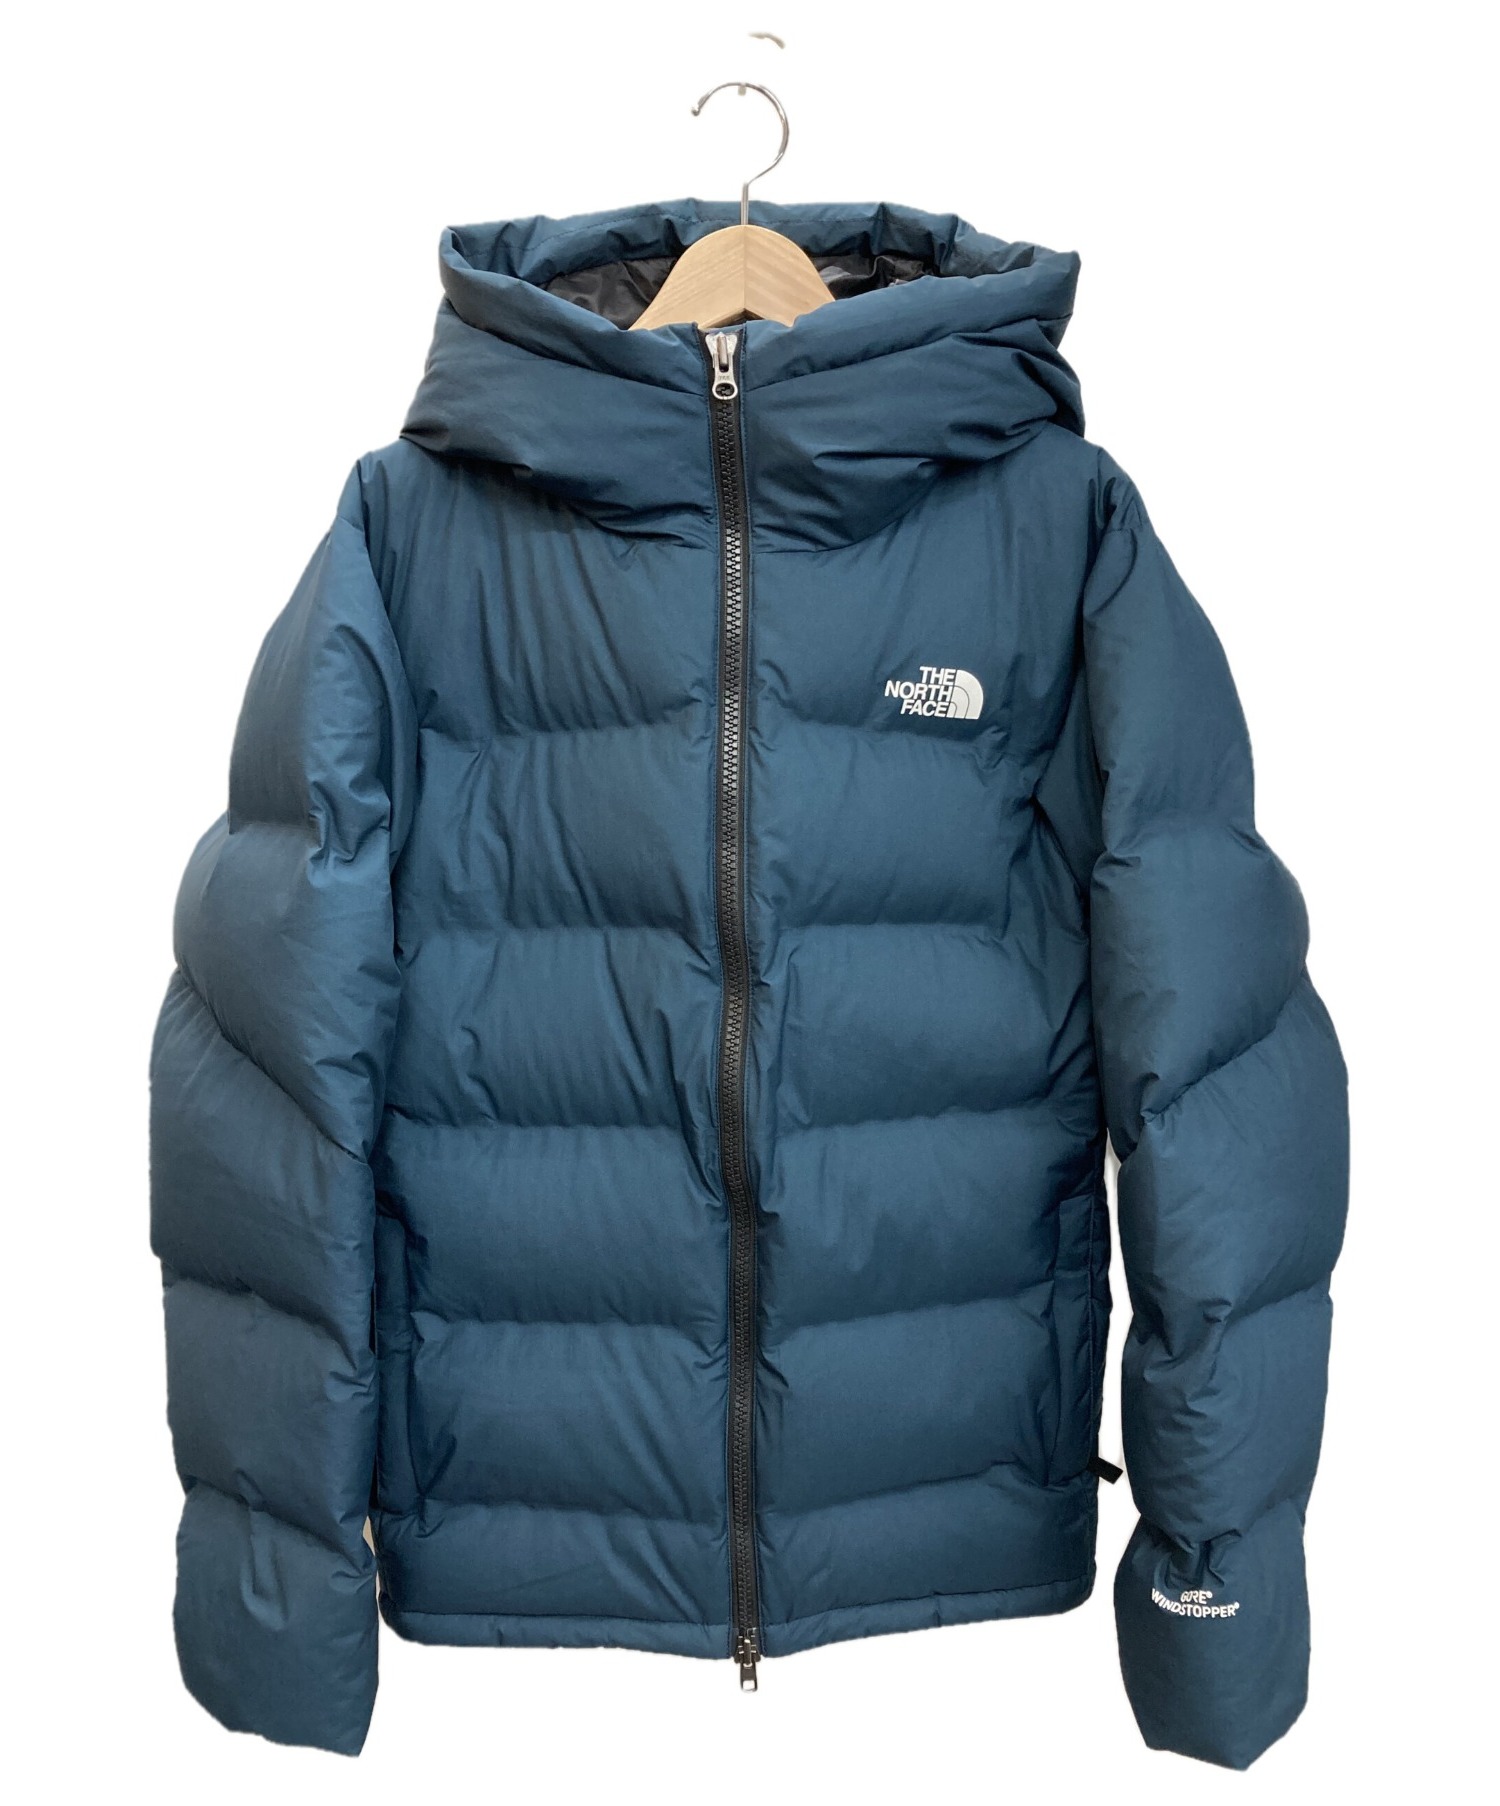 【BEAMS別注】THE NORTH FACE ダウンパーカー